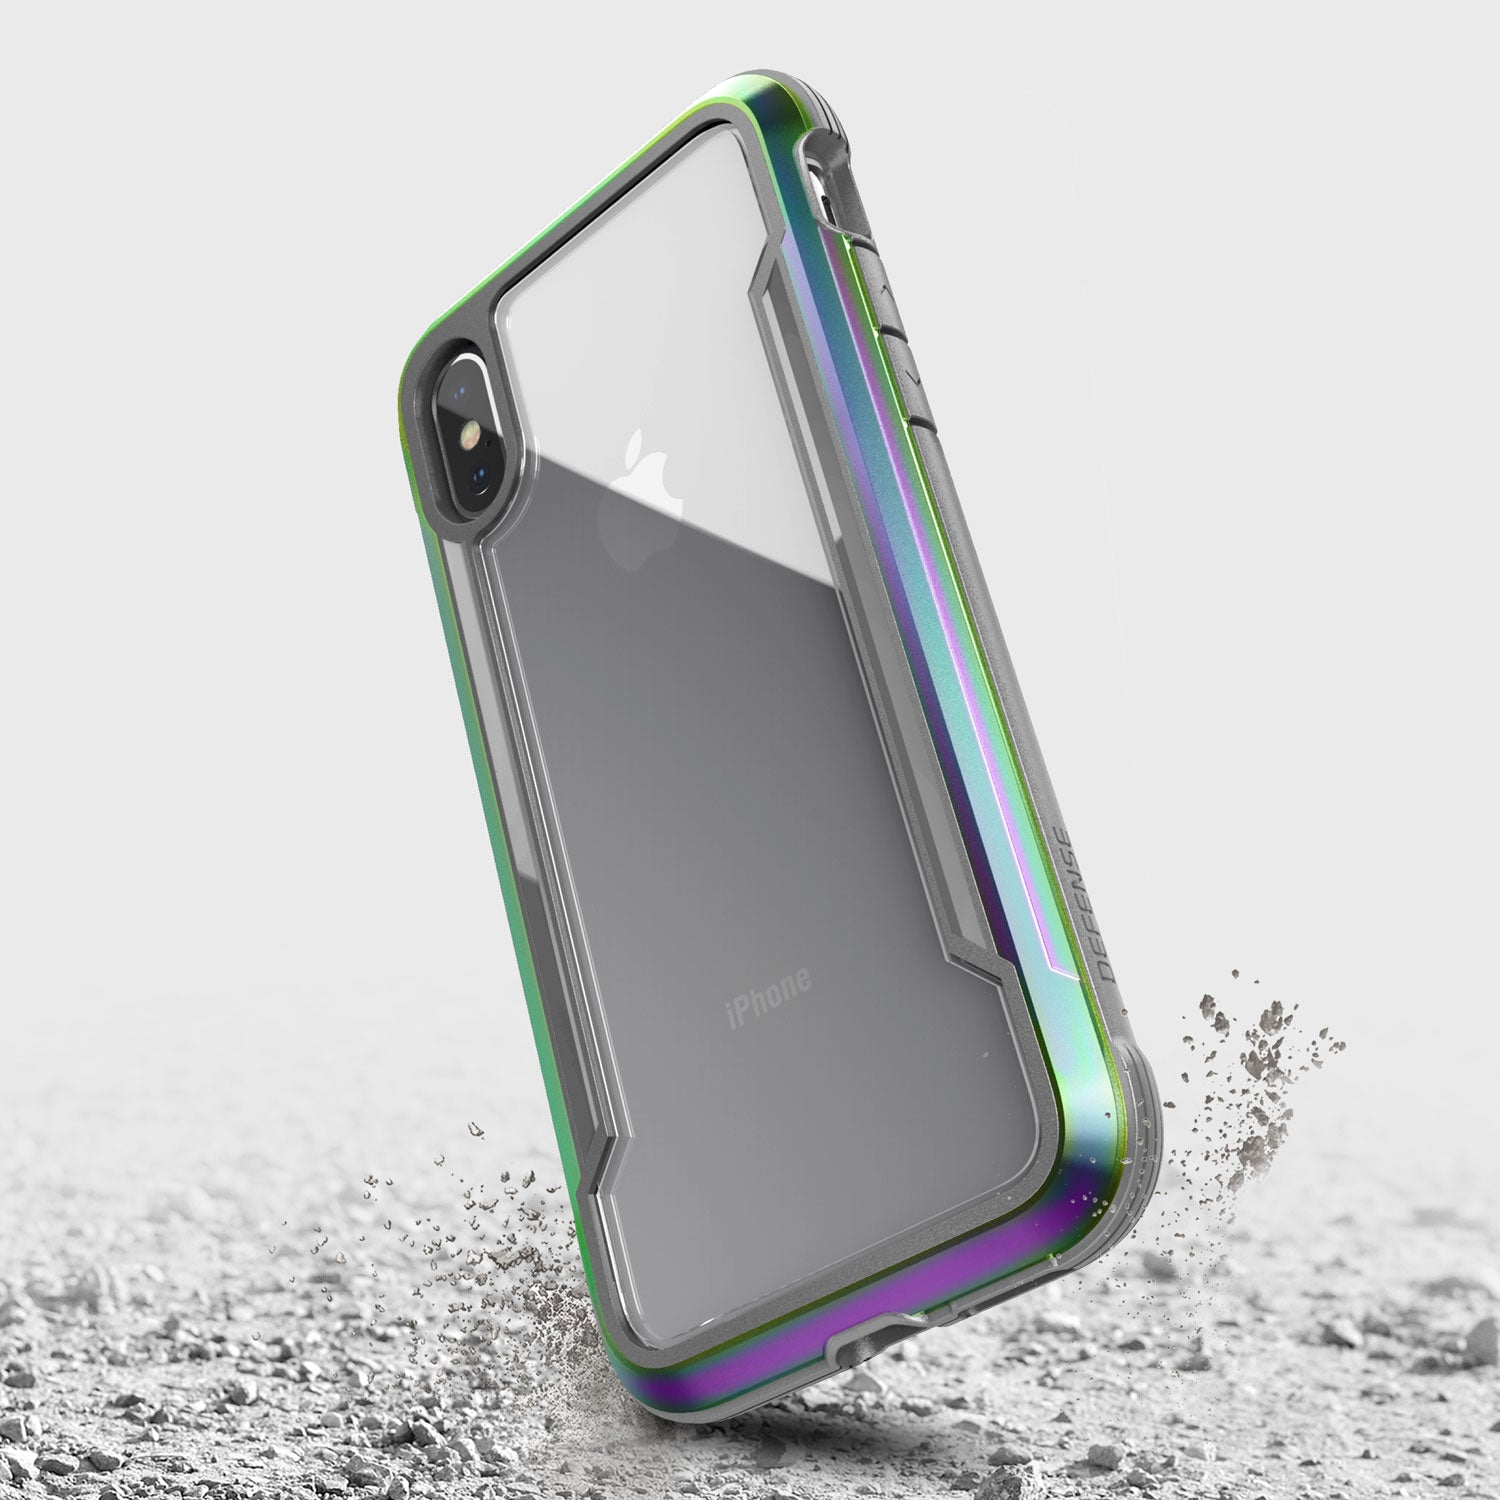 Get superior drop protection with the Raptic SHIELD case for iPhone XS Max featuring a vibrant rainbow colored back.